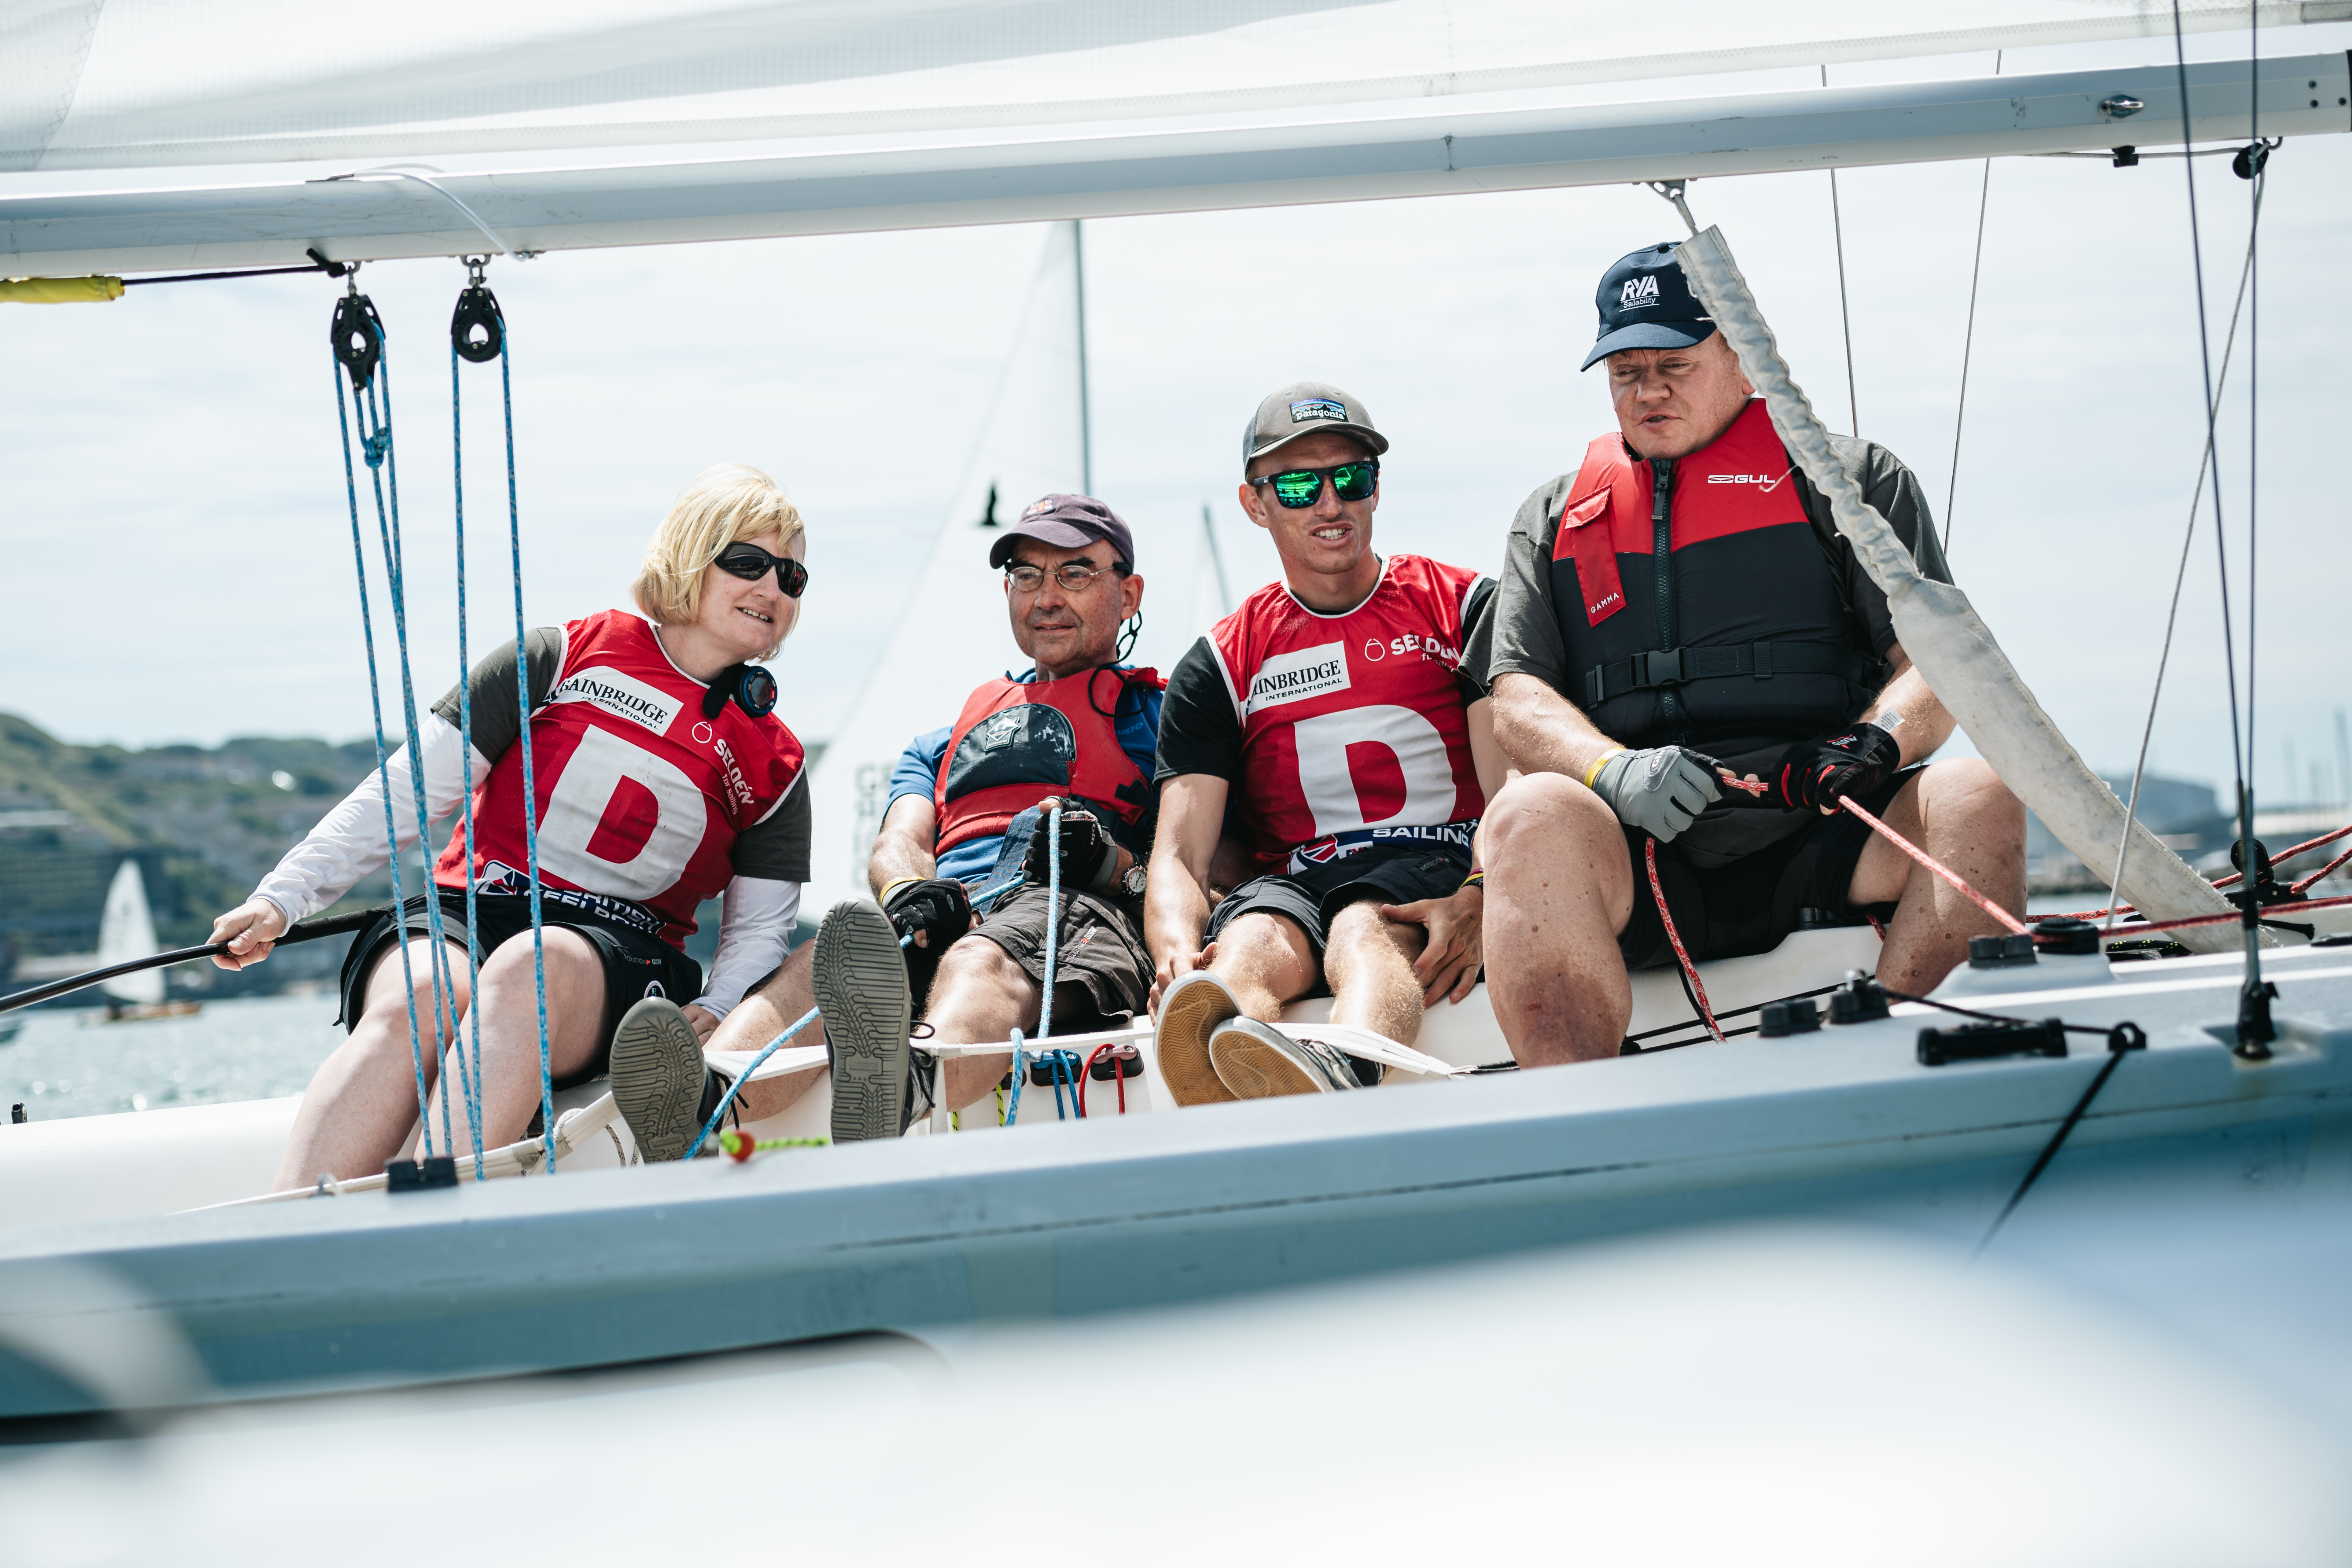 3 visually impaired sailors, with a sighted crew, racing a small keelboat on a sunny day